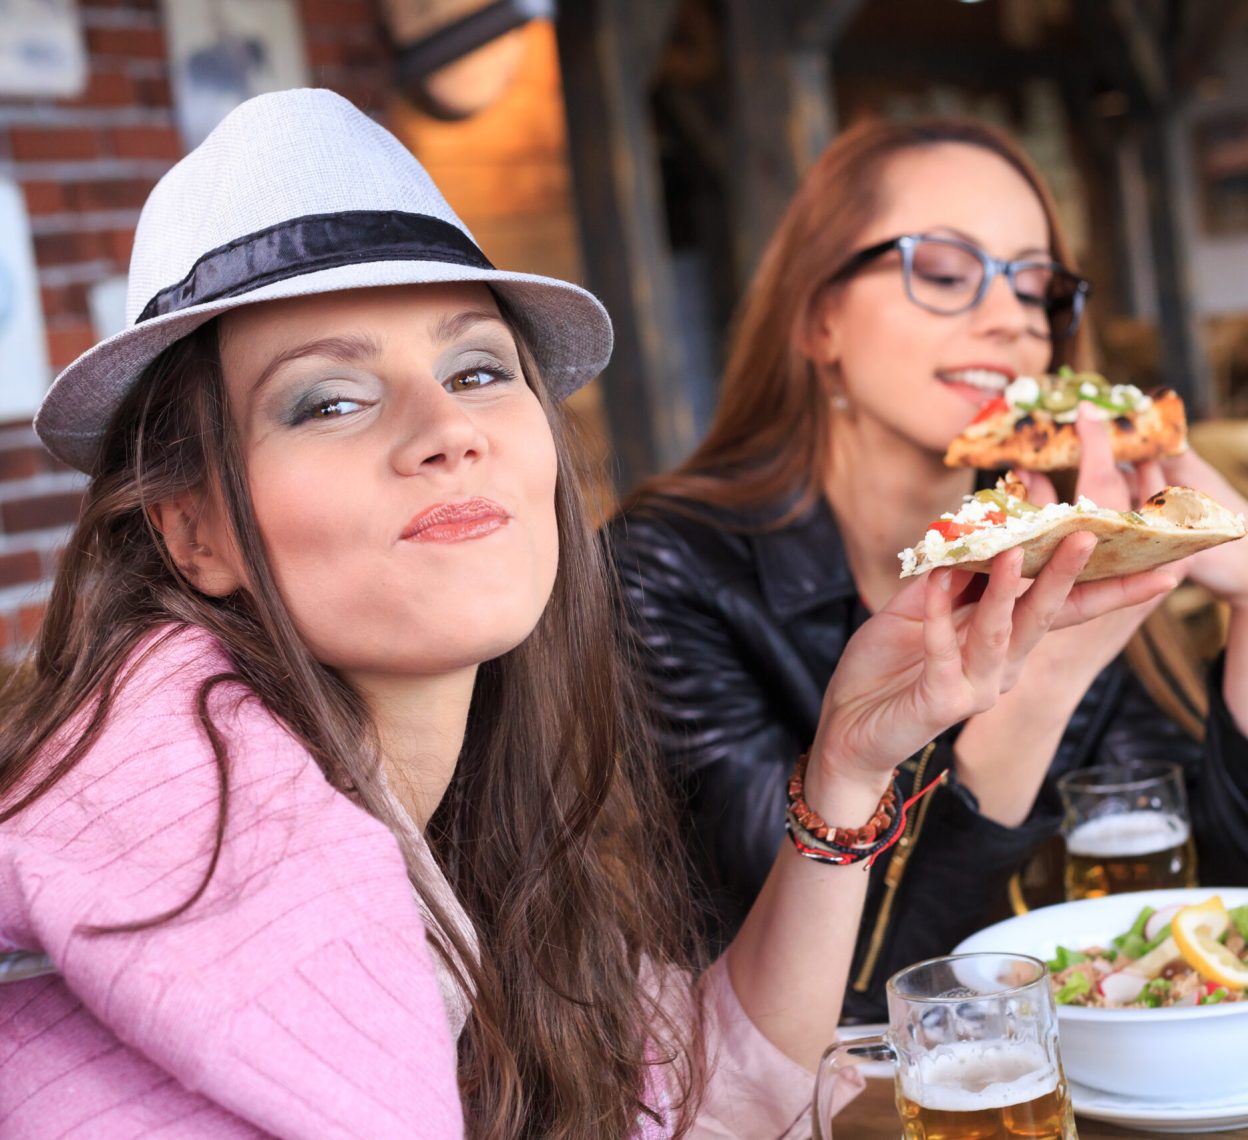 Young people eating pizza in restaurant, drinking beer.